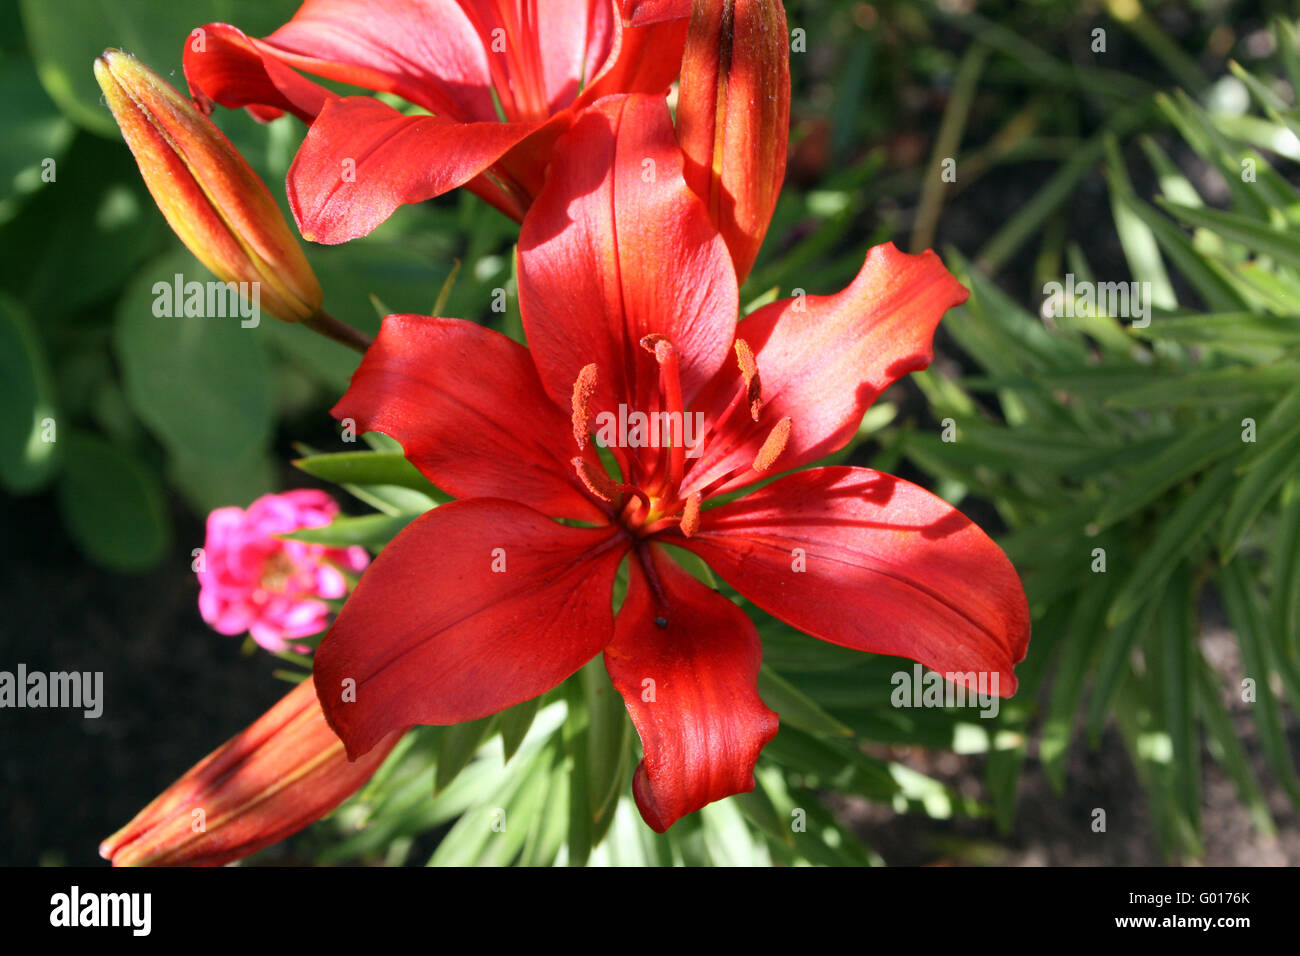 Lily Stock Photo